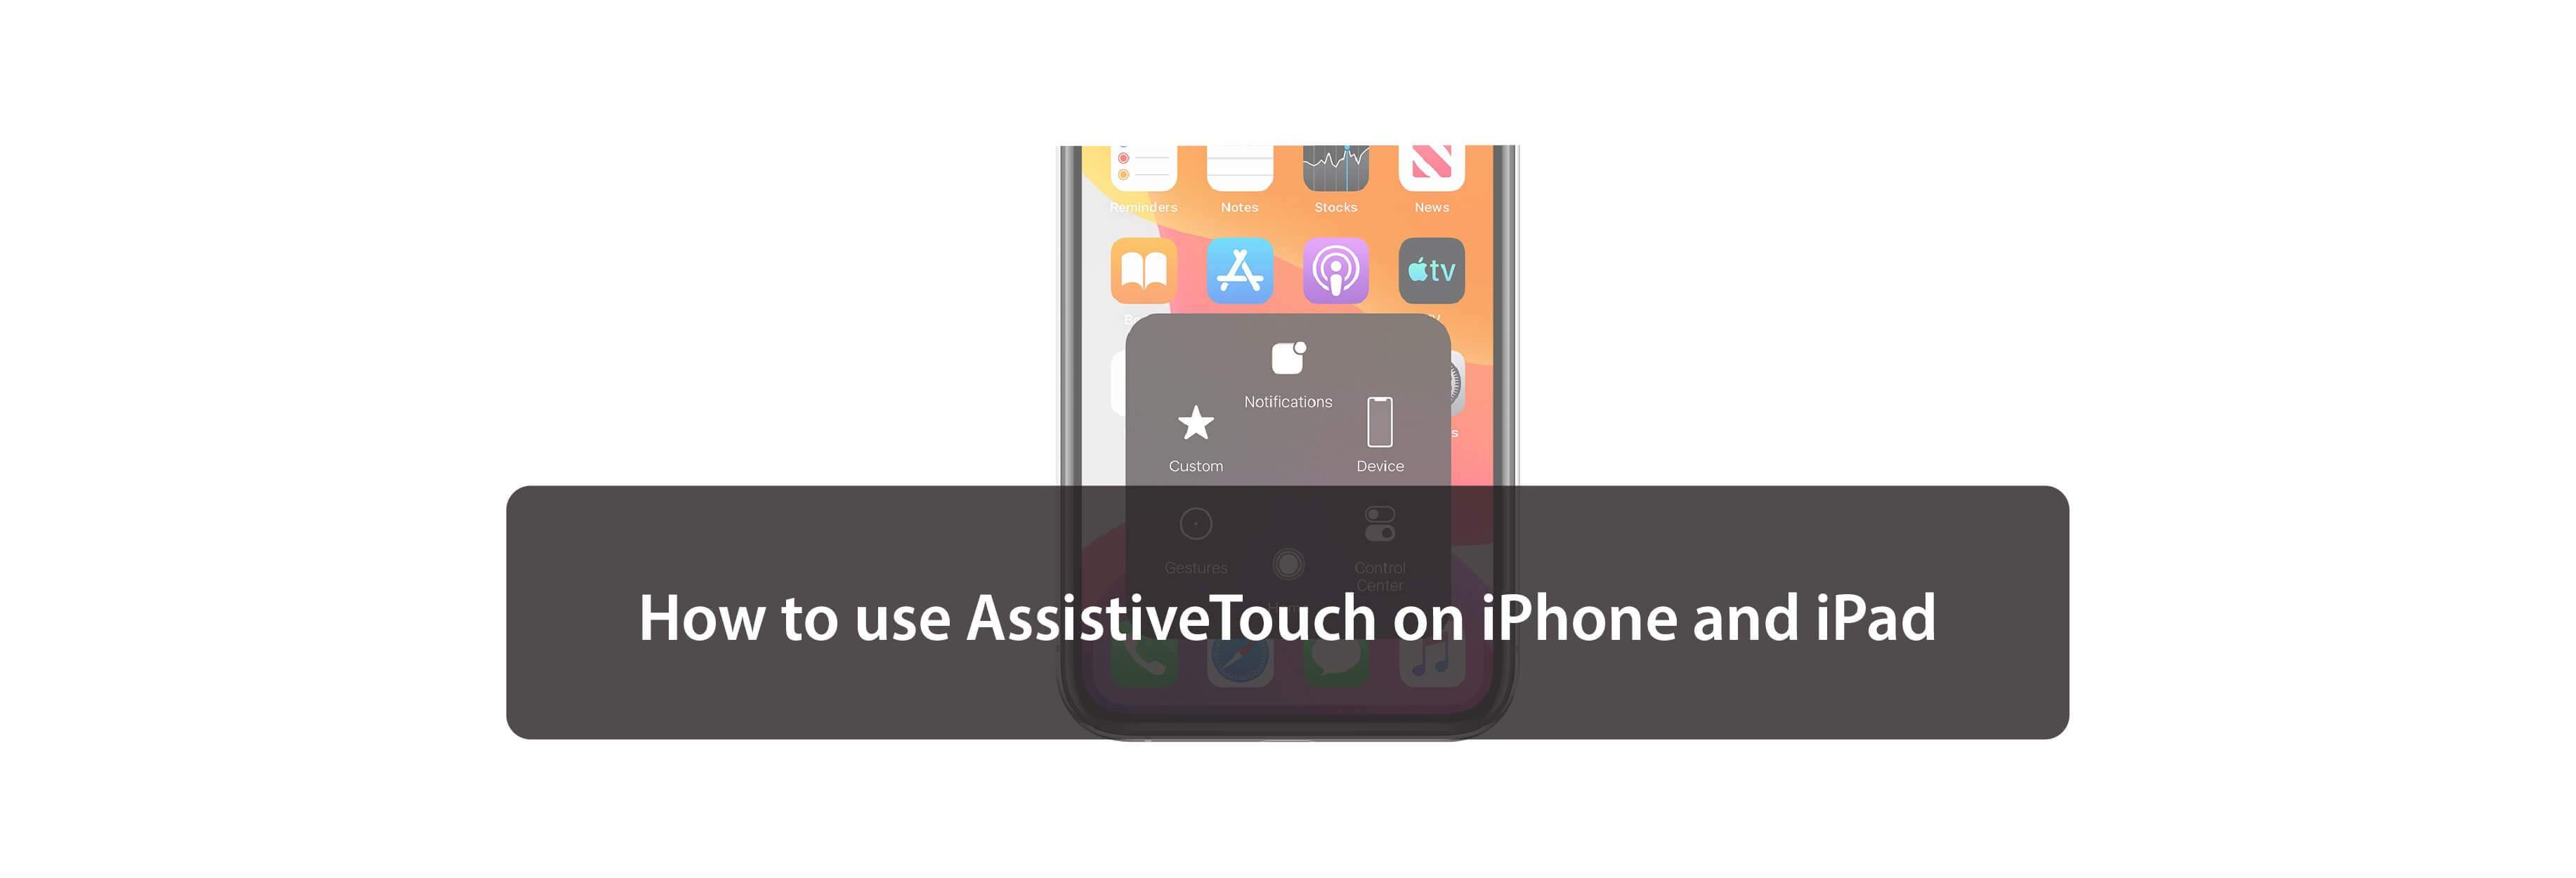 How to use AssistiveTouch on iPhone and iPad